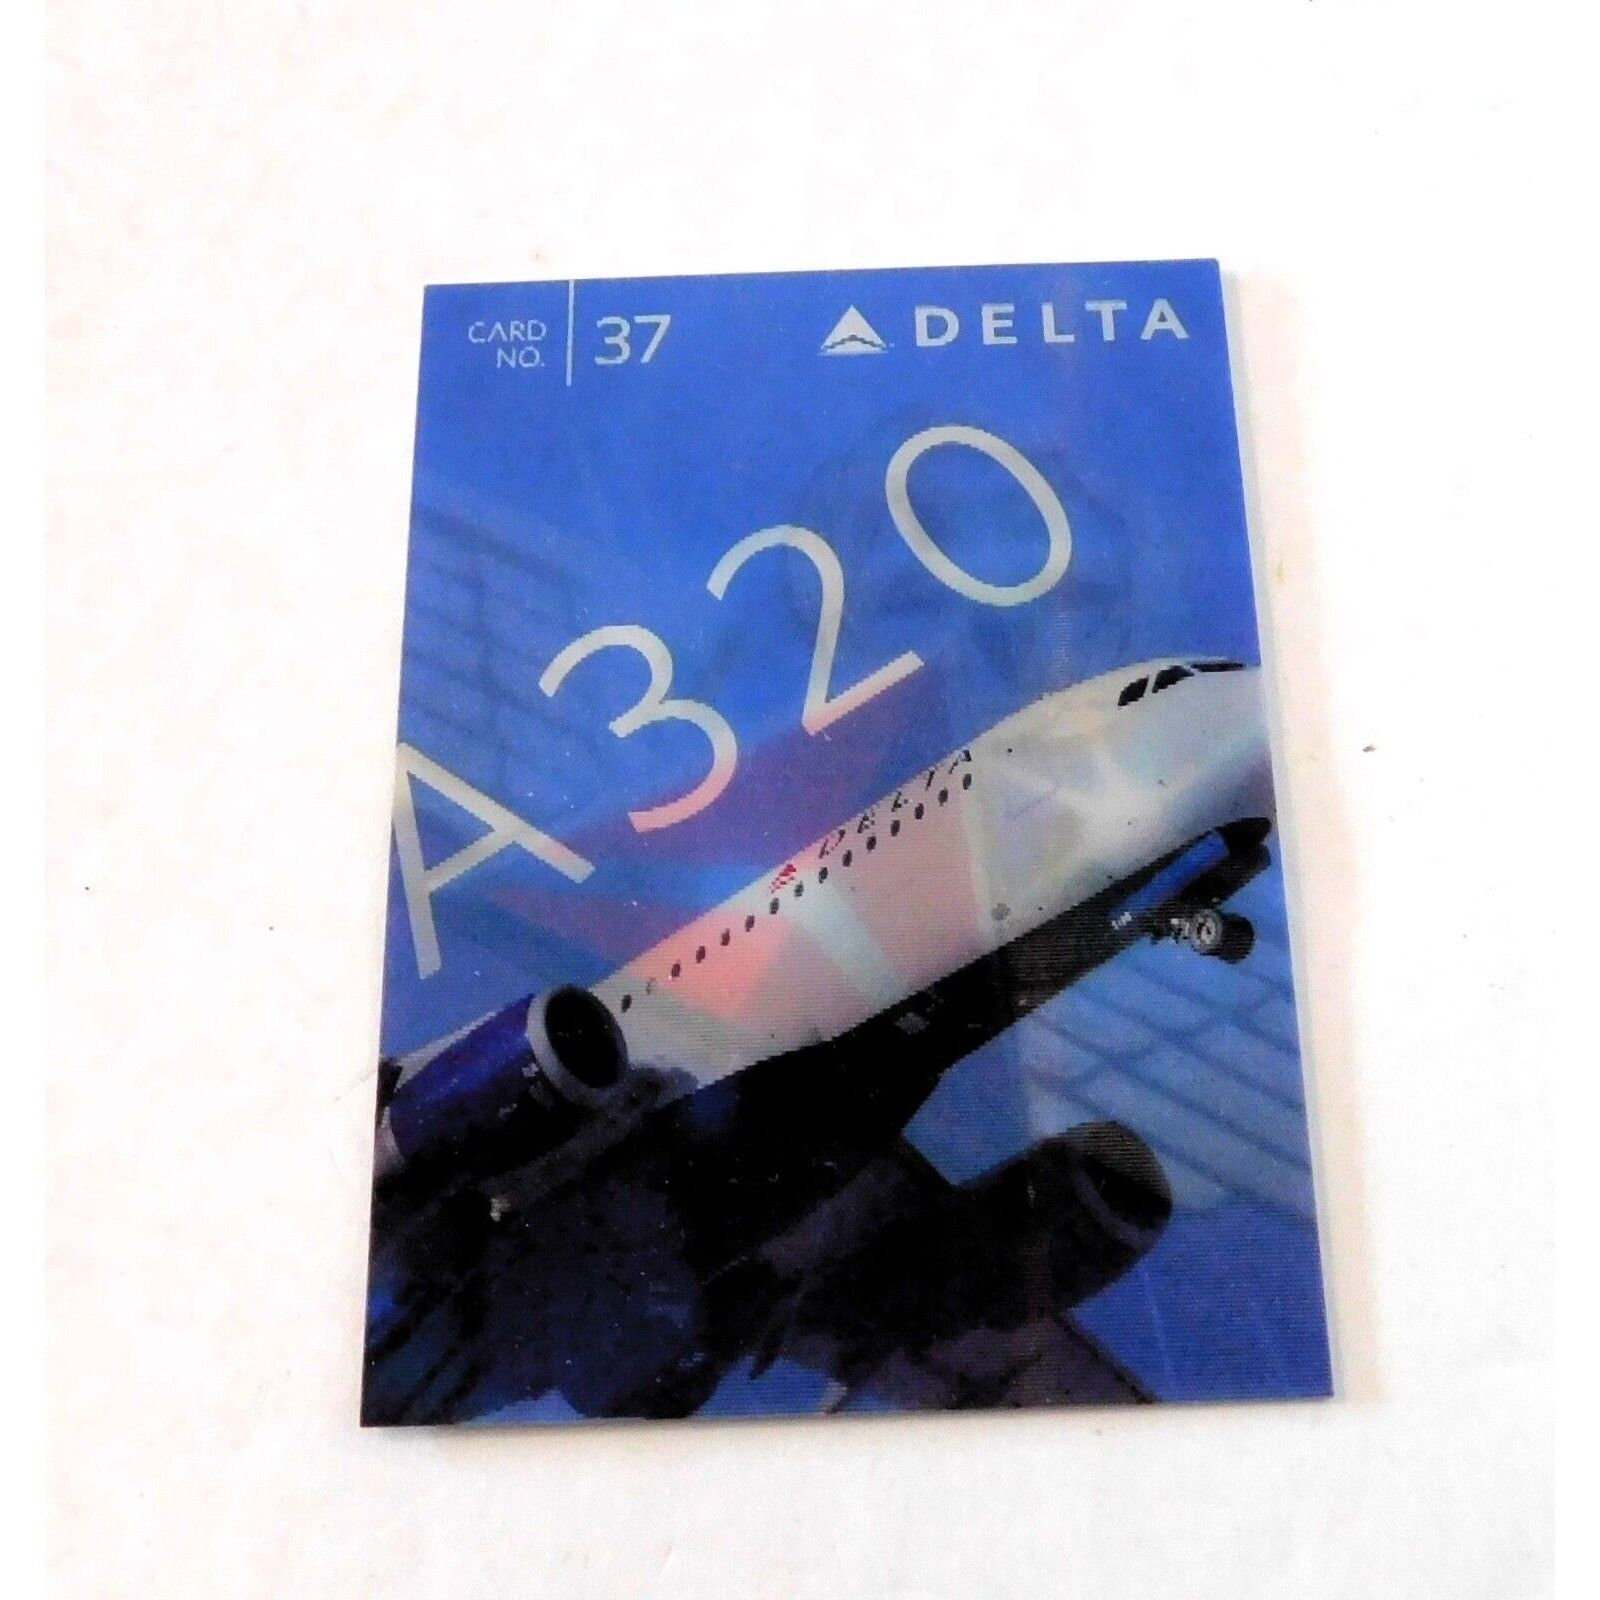 Delta Air Lines Airbus A320 Aircraft 2015 Pilot Collector Trading Card #37